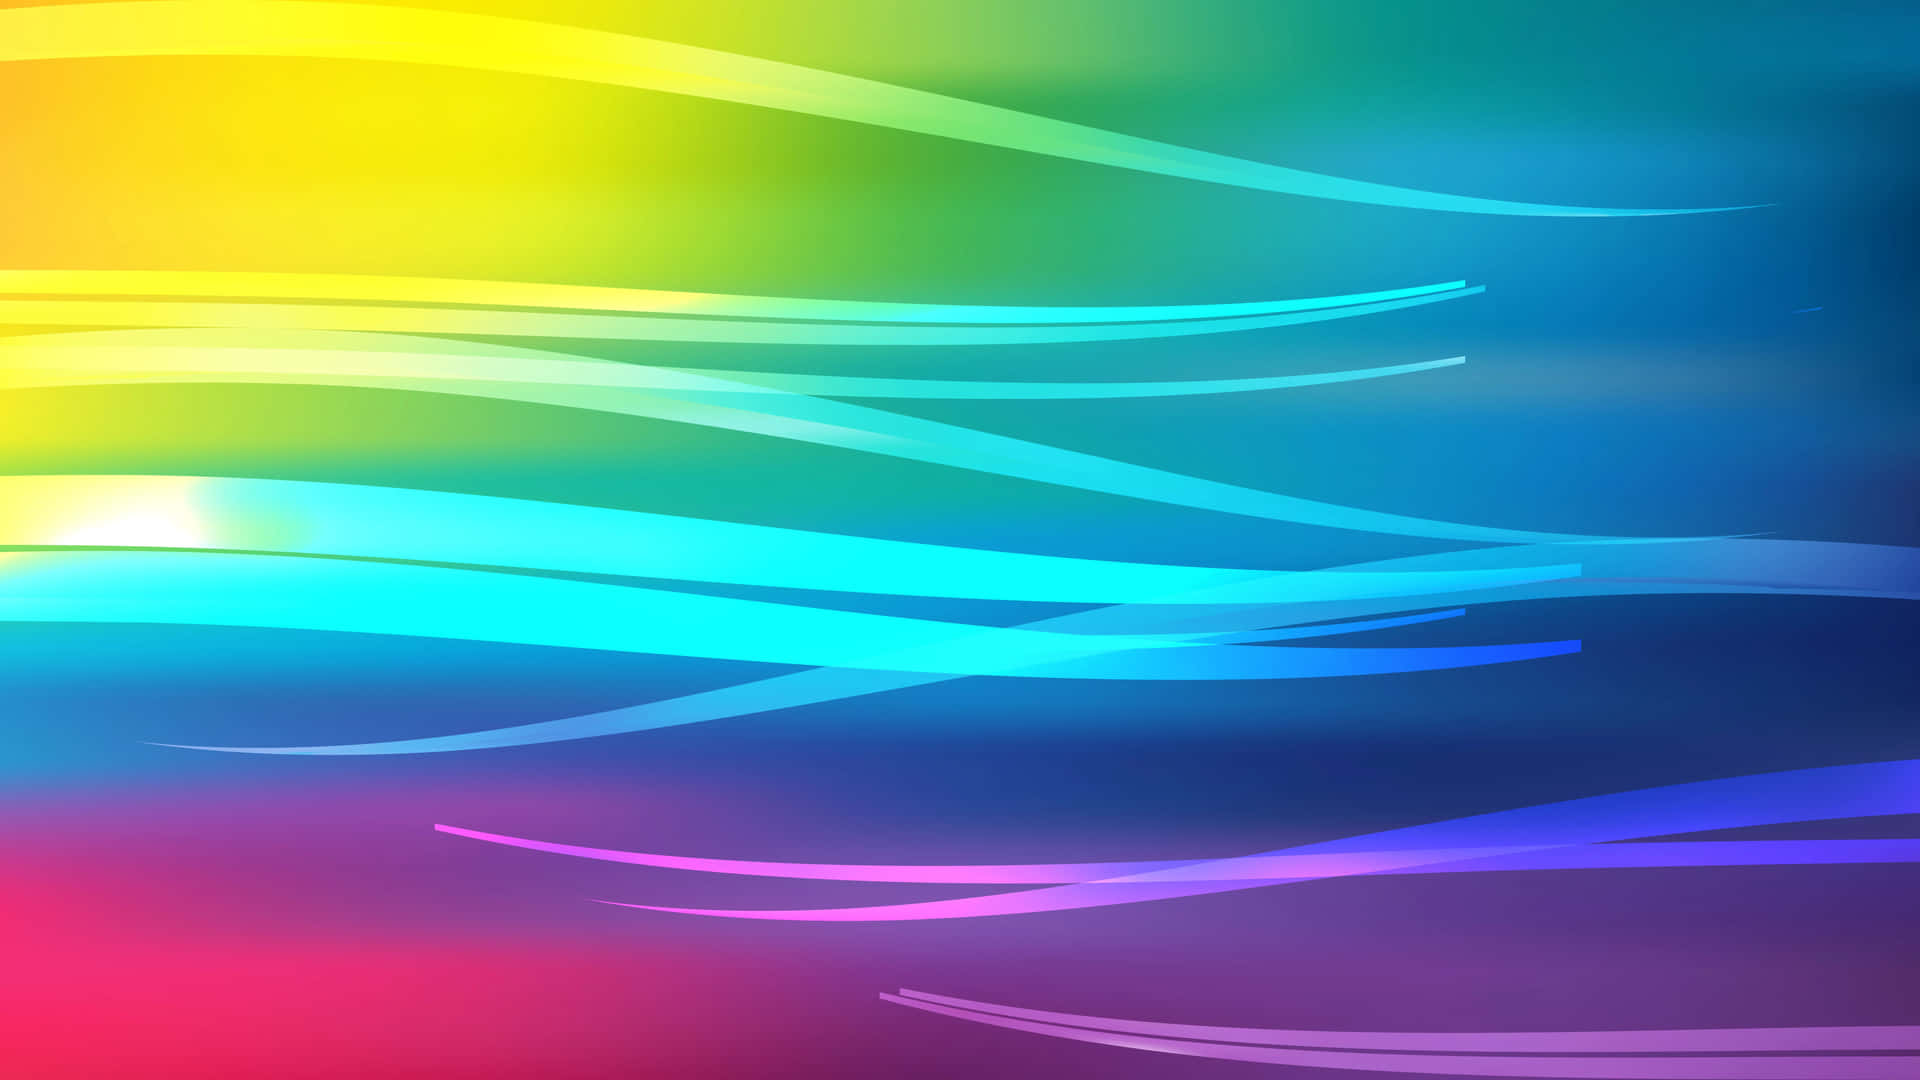 A Colorful Abstract Background With Waves